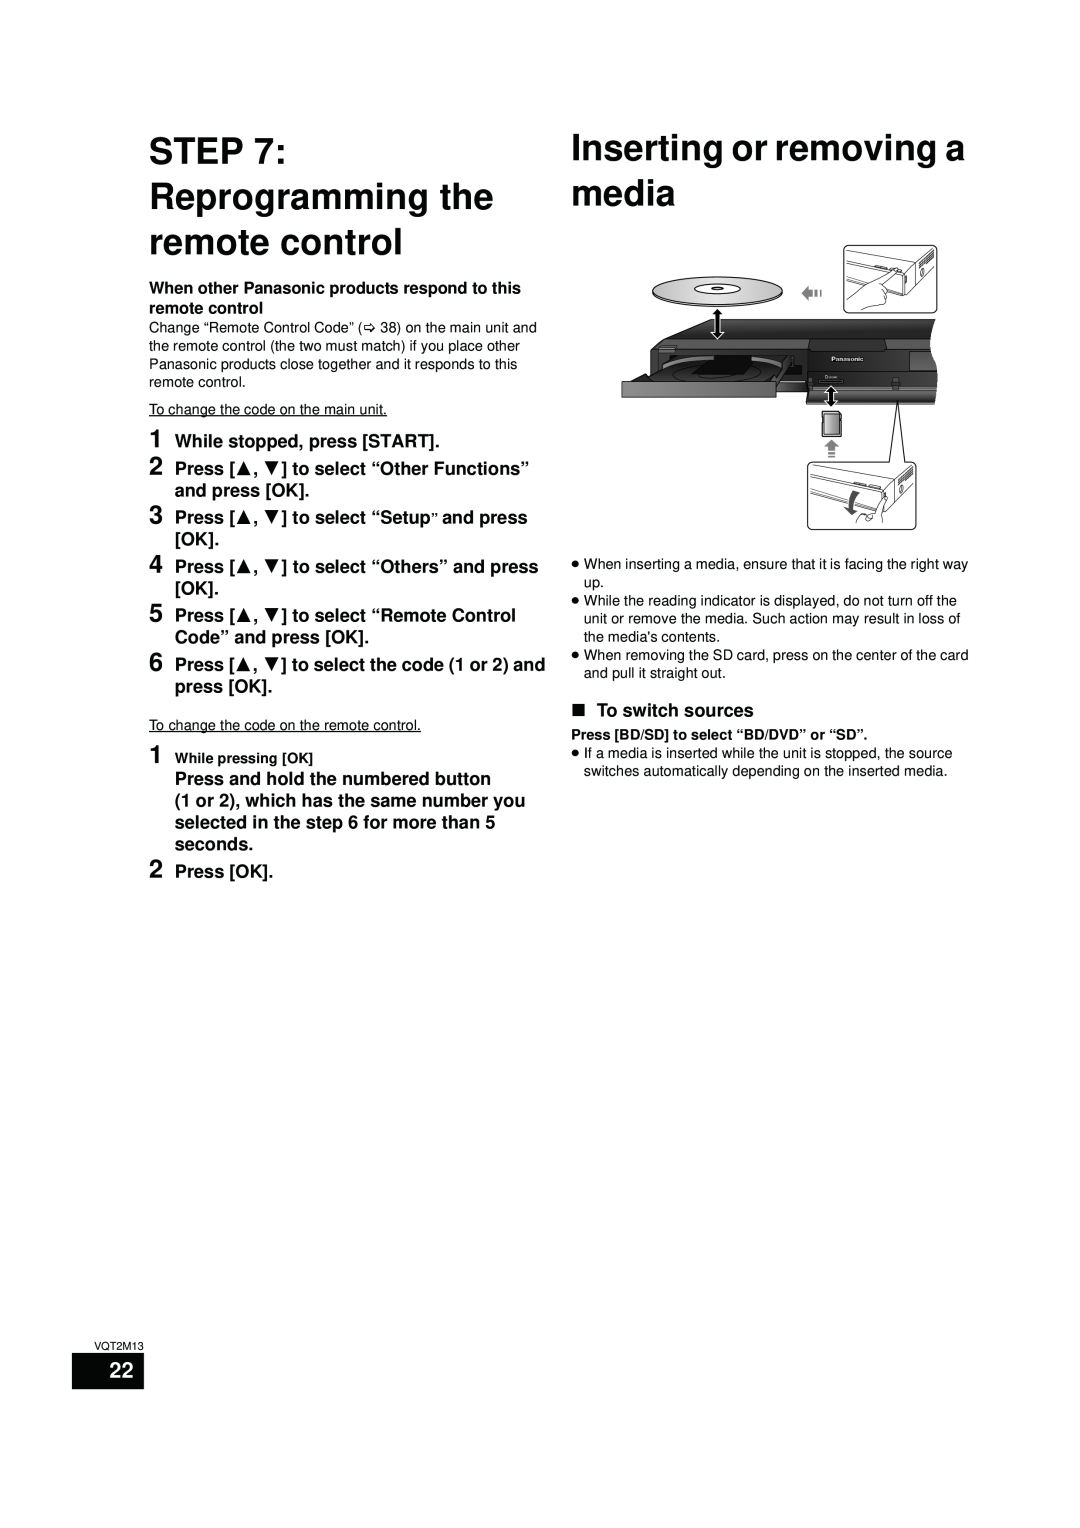 Panasonic SC-BT730 Reprogramming the remote control, Inserting or removing a media, While stopped, press START, Press OK 